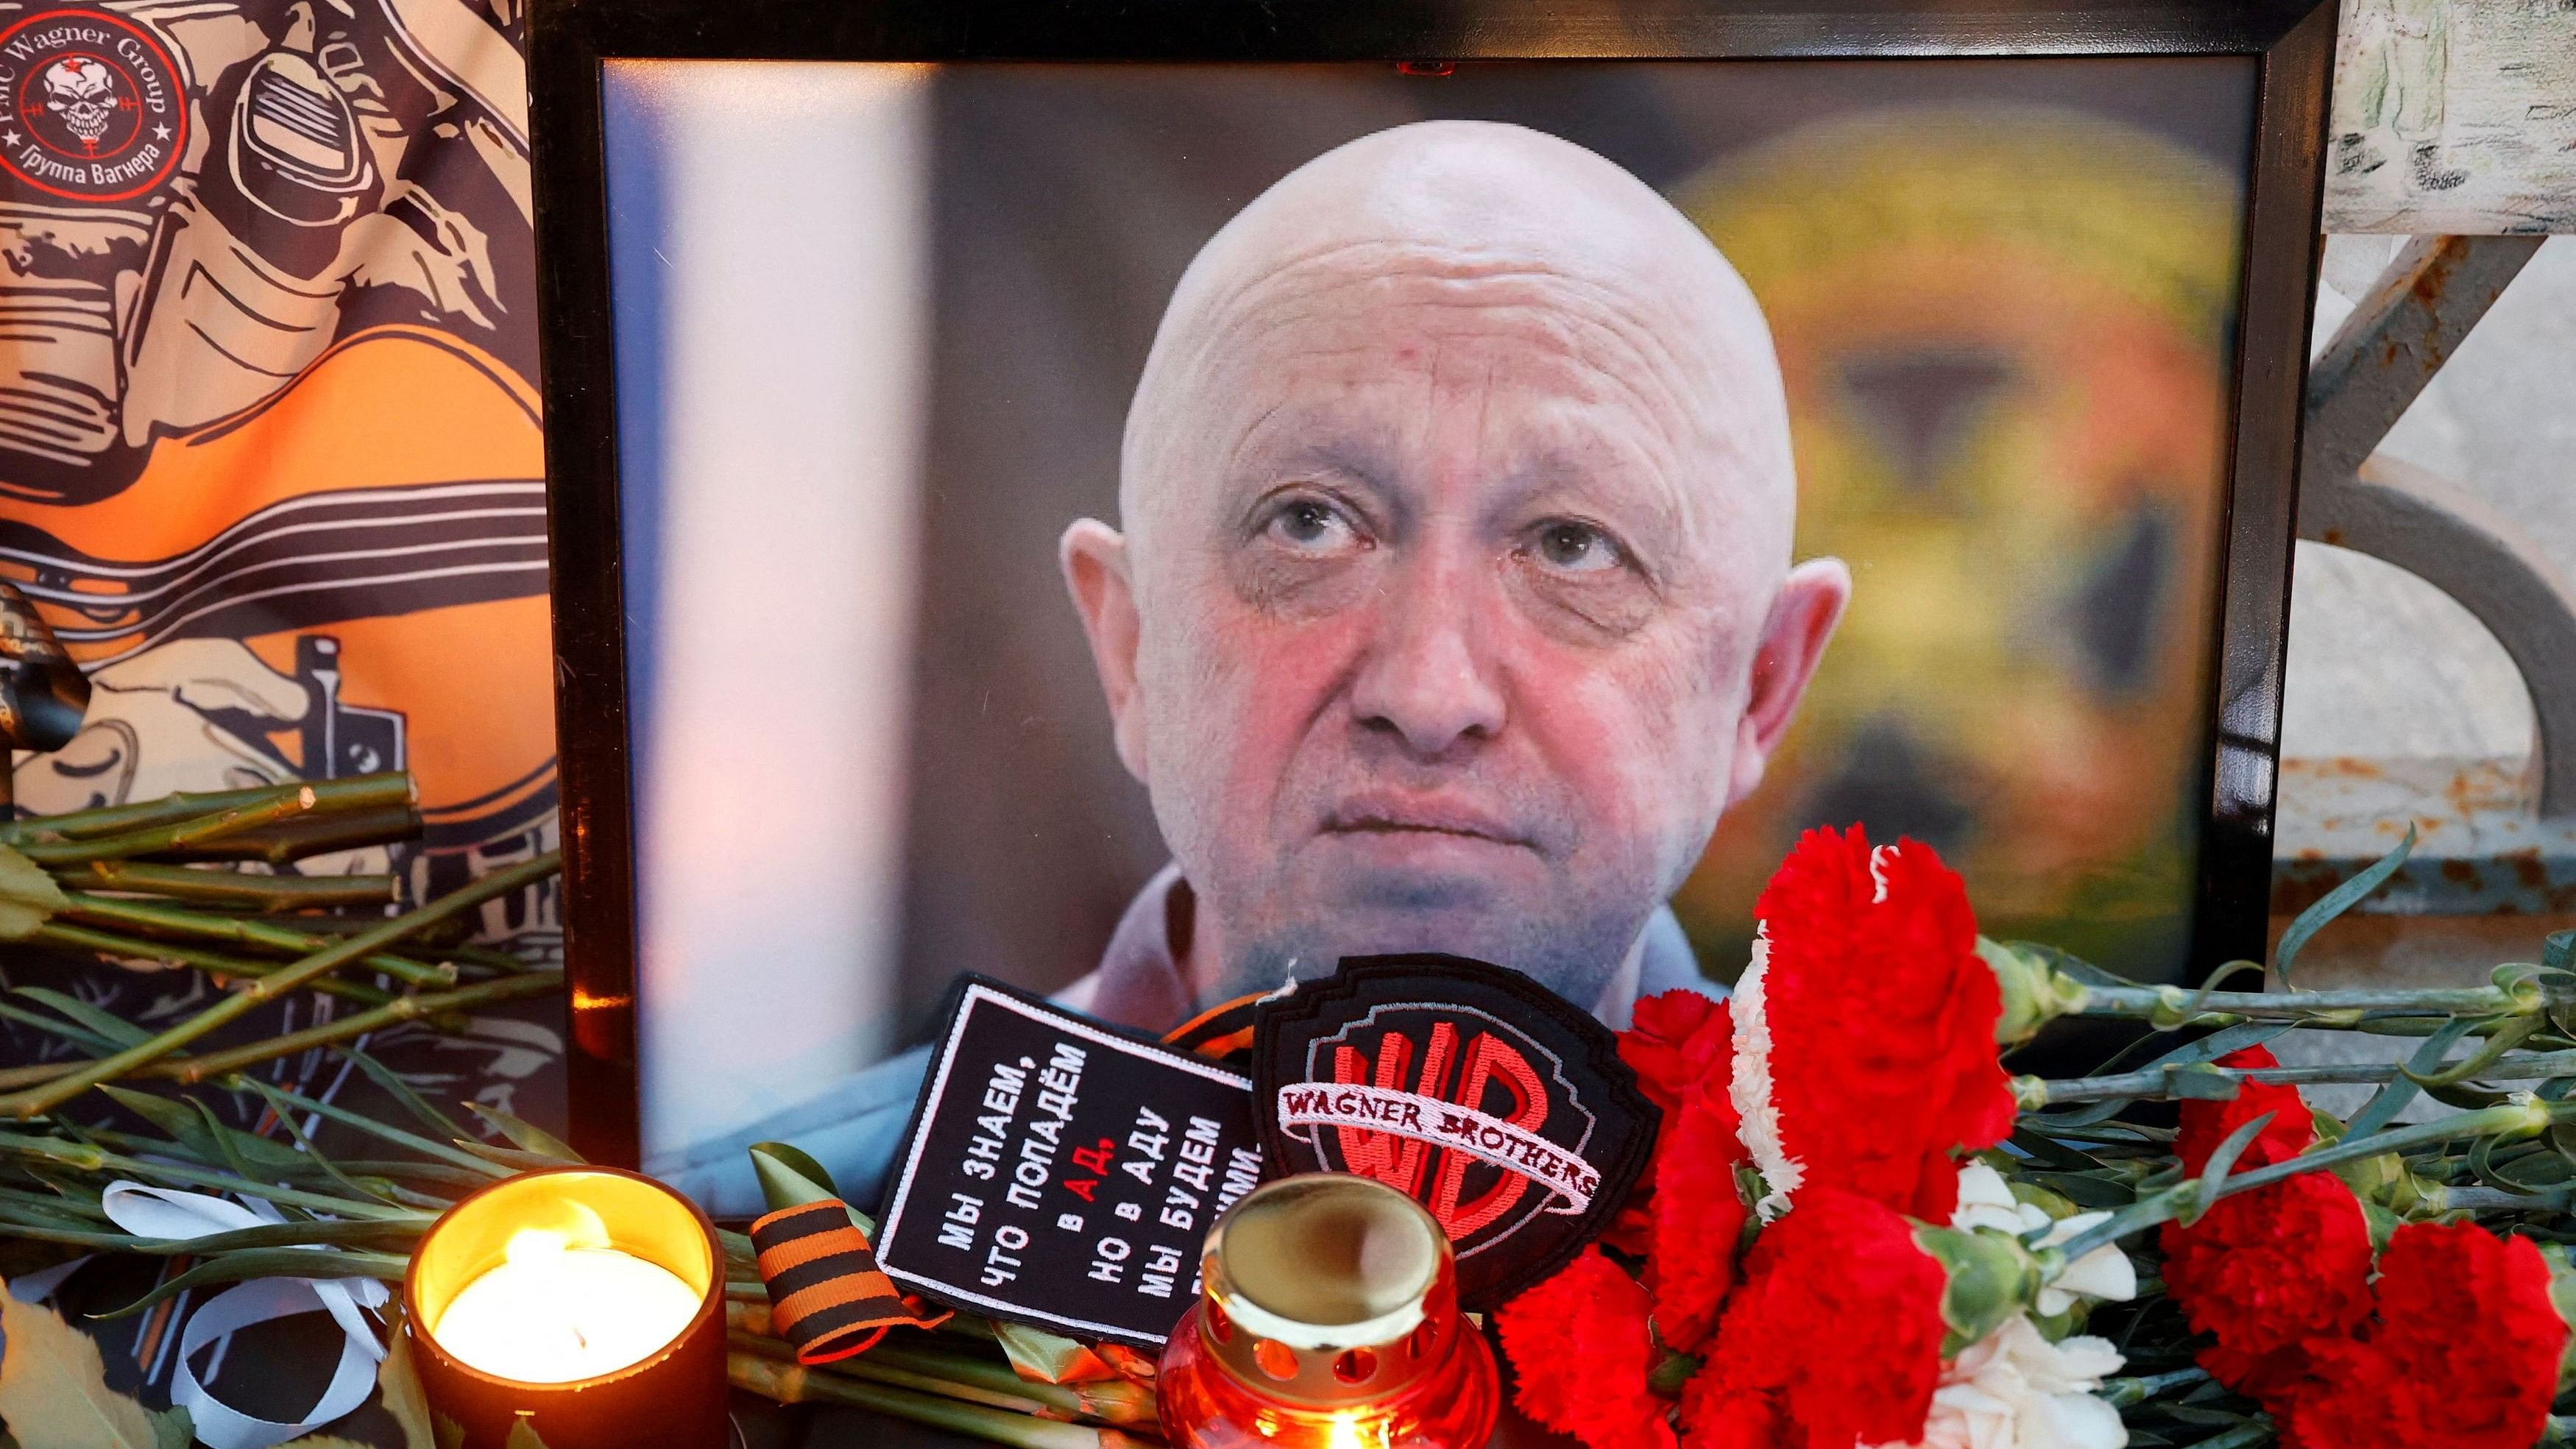 <div class="paragraphs"><p>Portrait of Wagner mercenary chief Yevgeny Prigozhin at a makeshift memorial in Moscow</p></div>